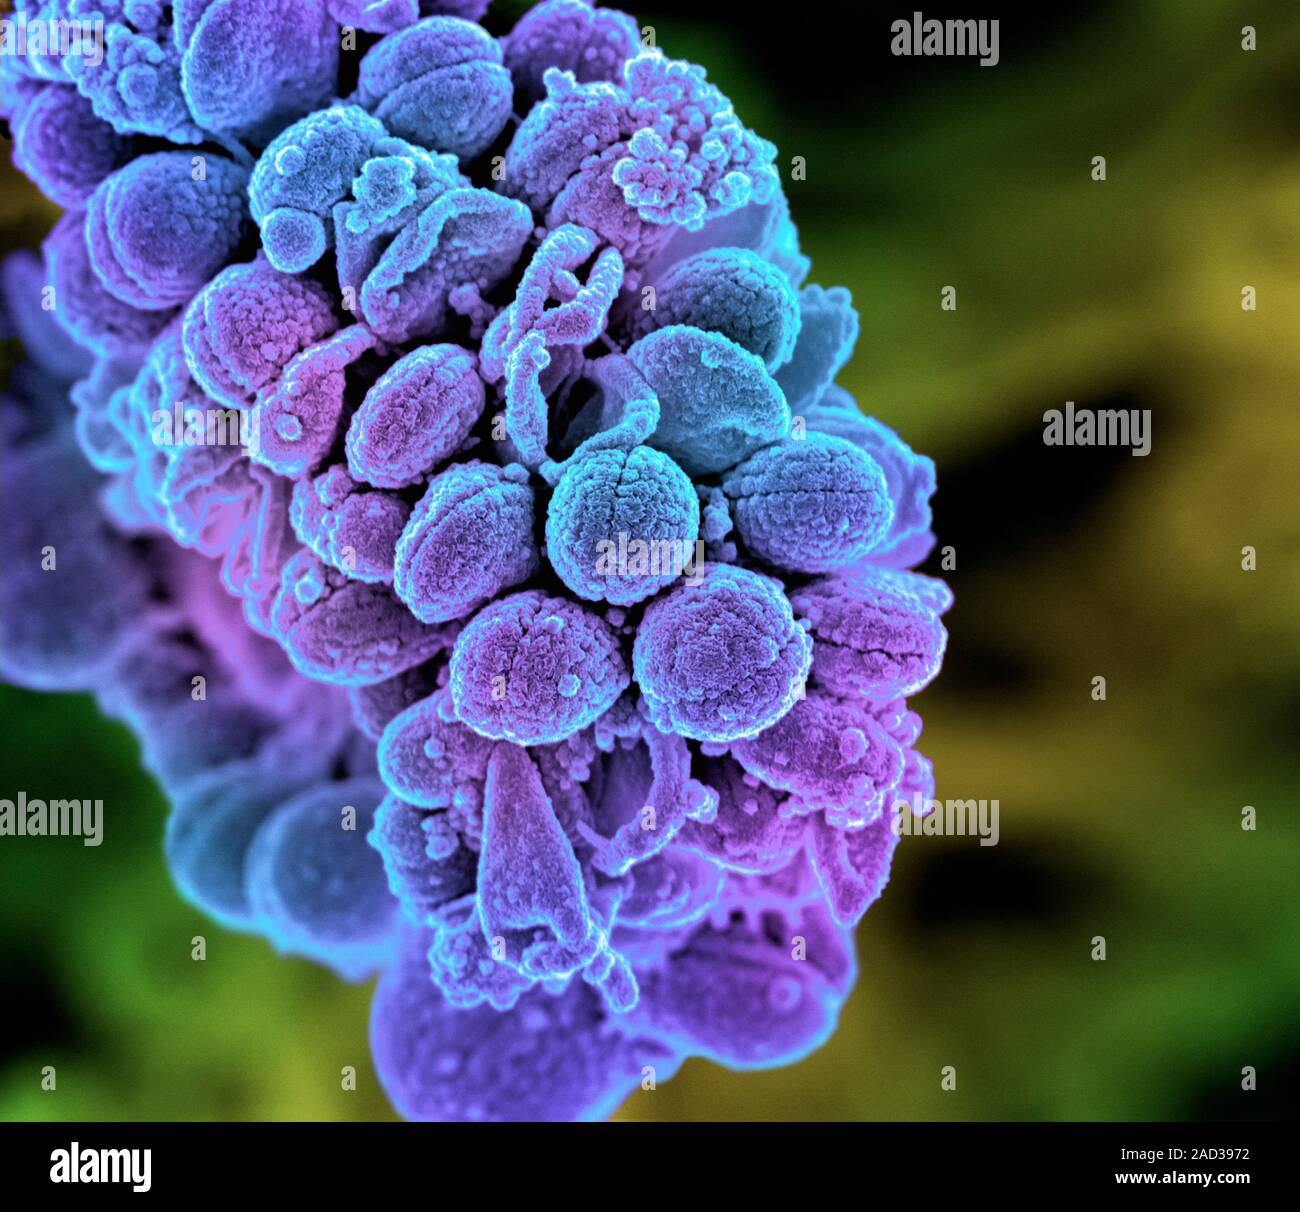 Streptococcus bacteria. Coloured scanning electron micrograph (SEM) of ...